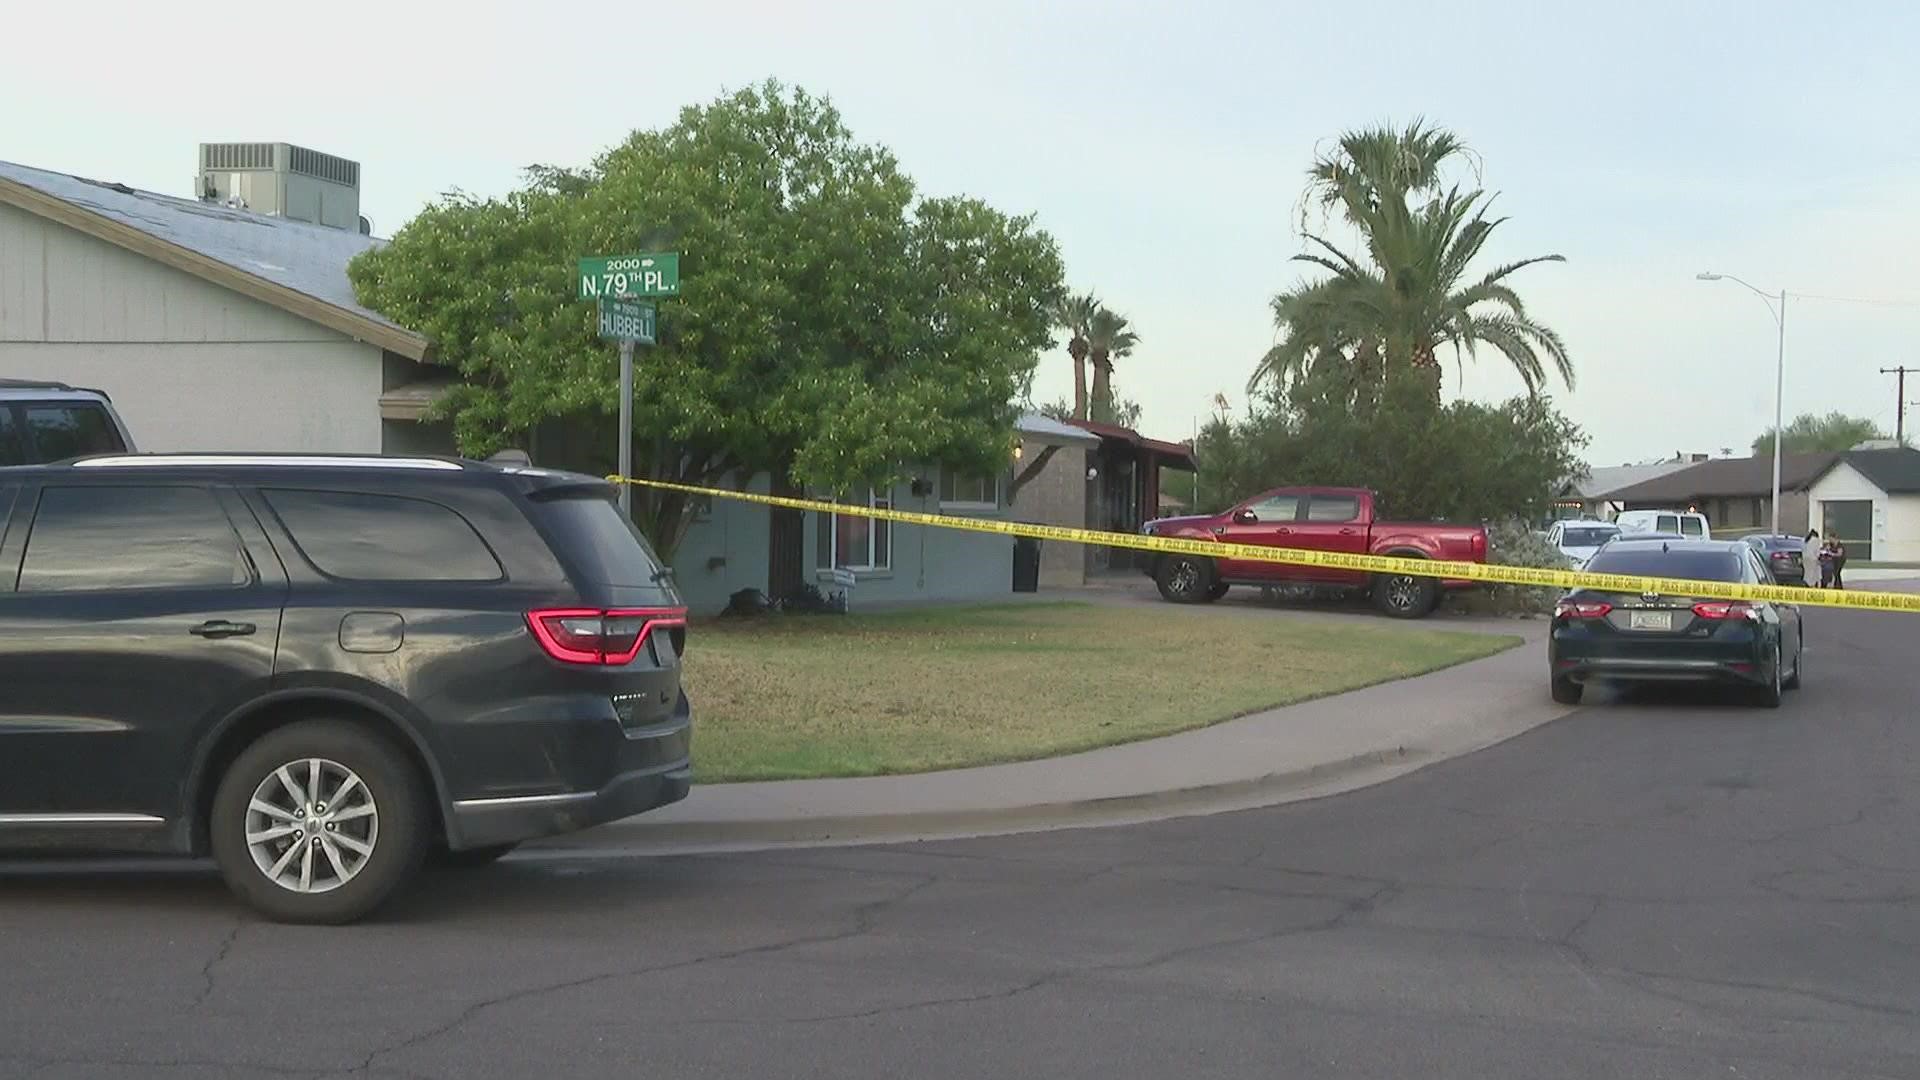 The shooting incident occurred early Friday morning near 7900 E. Hubbell Street in Scottsdale.